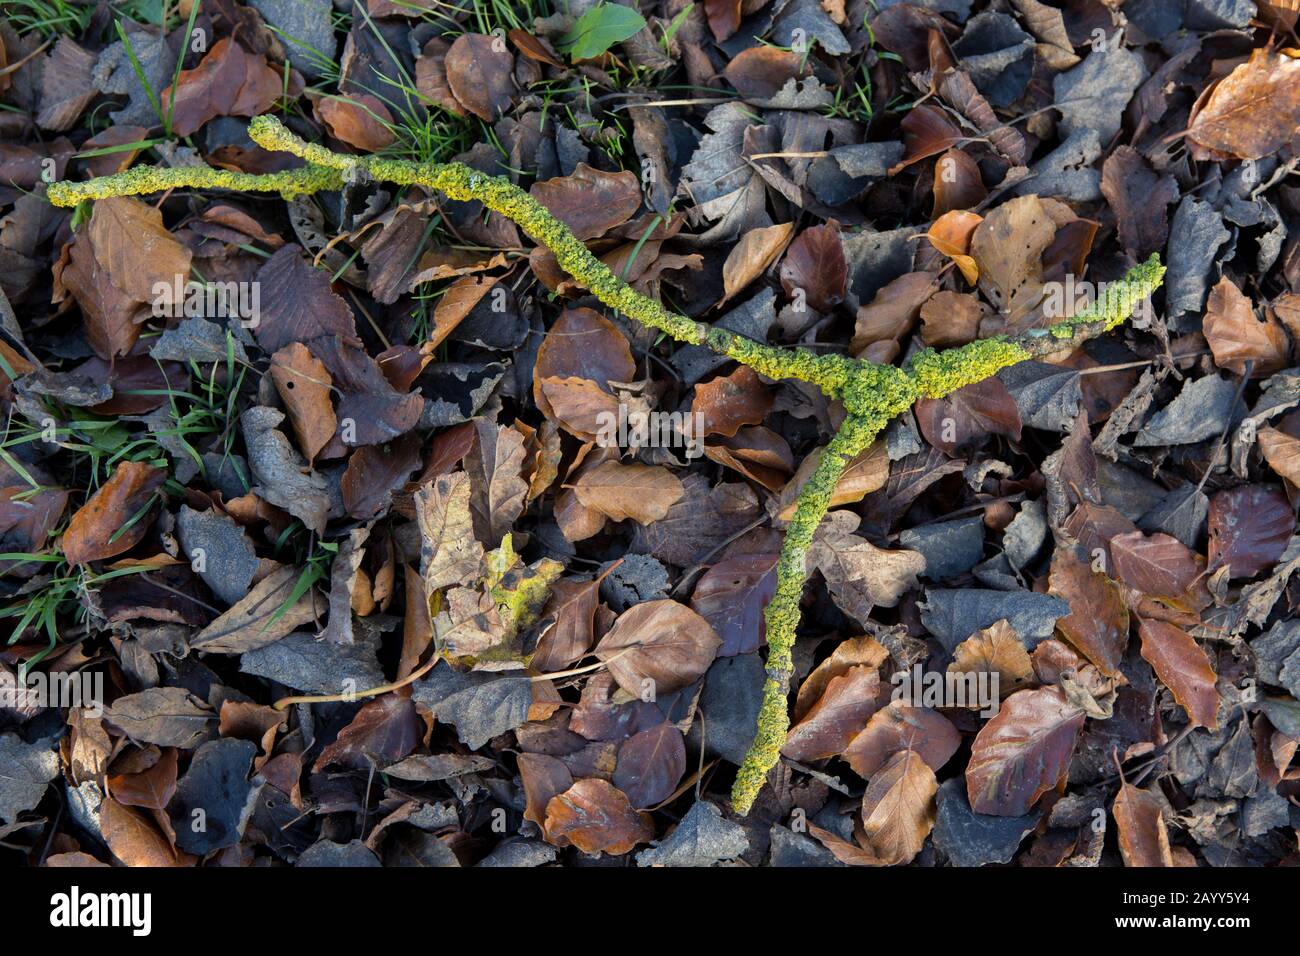 A broken branch covered in Lichen lying on fallen leaves. Stock Photo